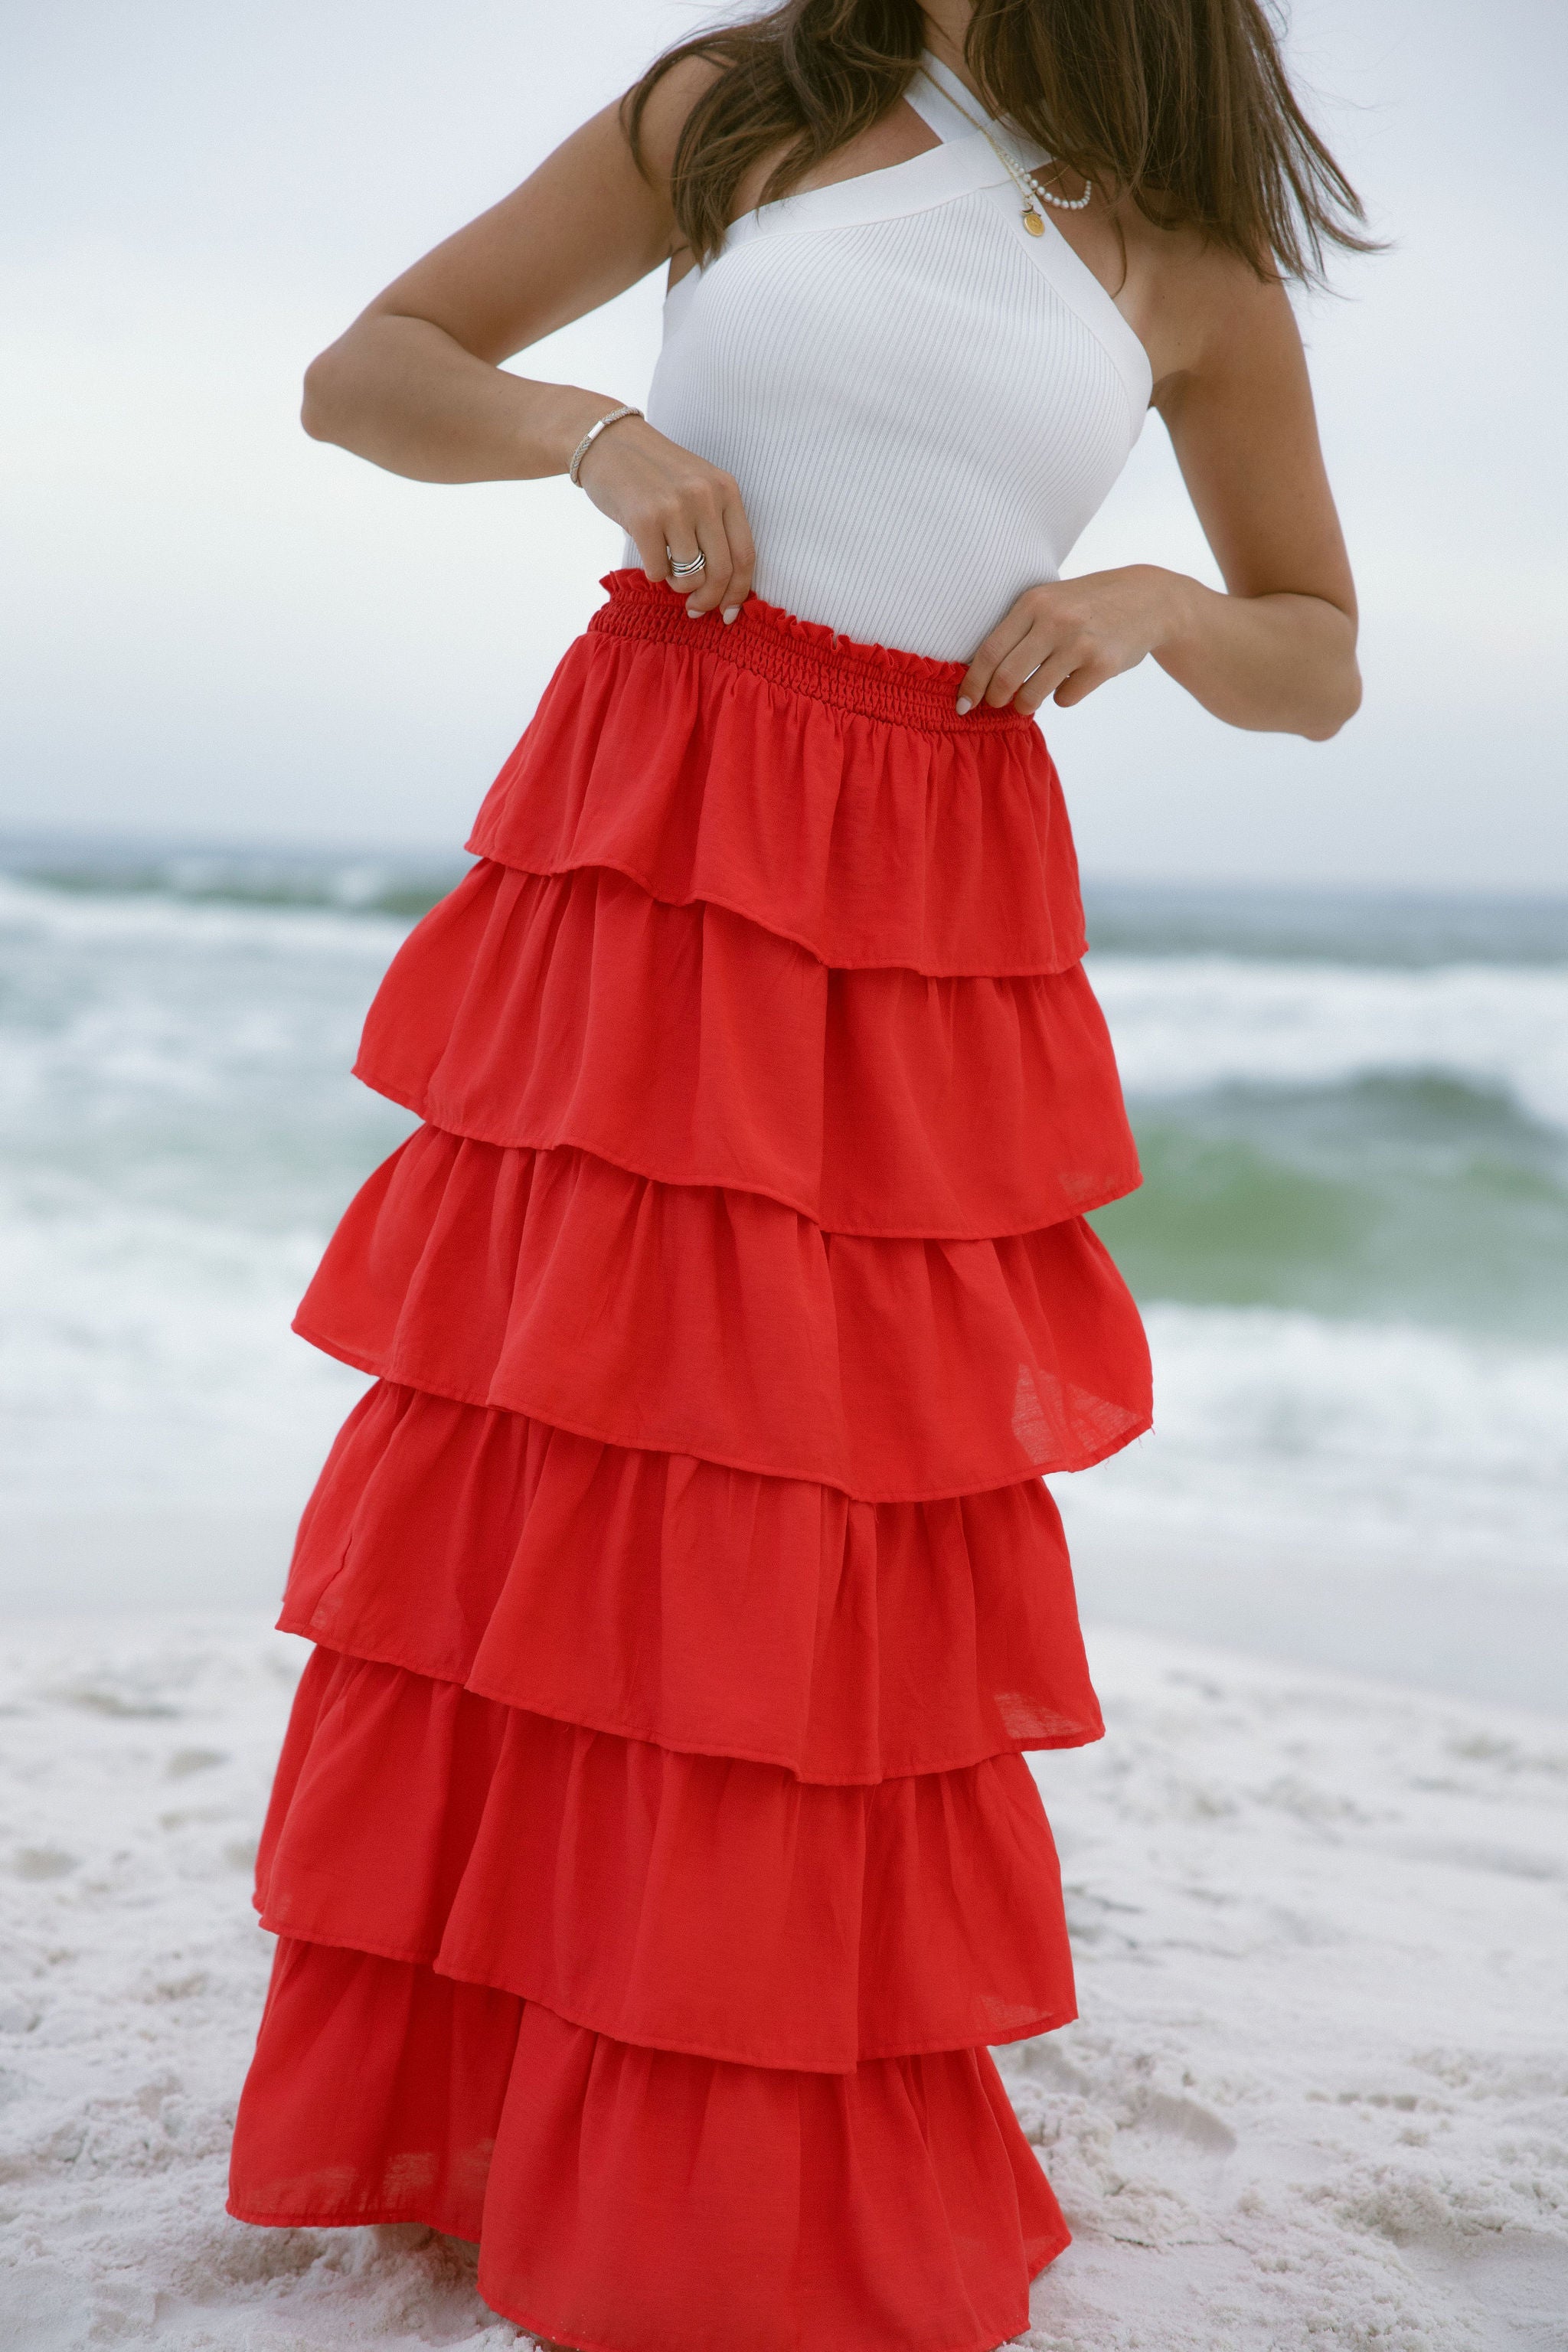 Lower body front view of female model wearing the Katrina Tiered Ruffle Maxi Skirt in Red that has tiered red fabric and an elastic waist. Worn with white top tucked in.